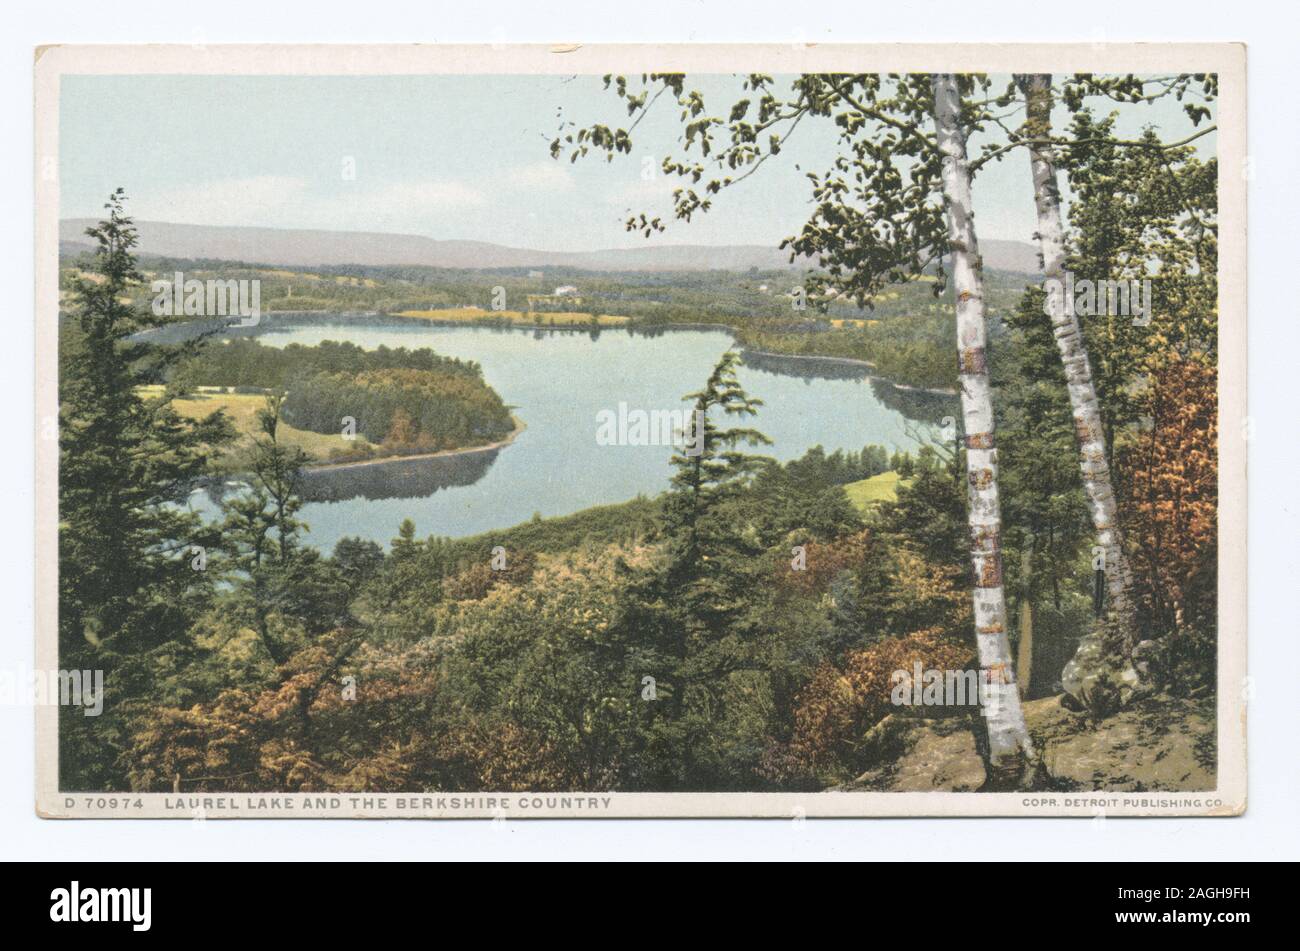 Postcard series number: 70974 Continued the 14000 series. 70000 series issued with large gaps in numbering, may account for some unnumbered cards.; Laurel Lake and The Berkshire Country, Massachusetts Stock Photo